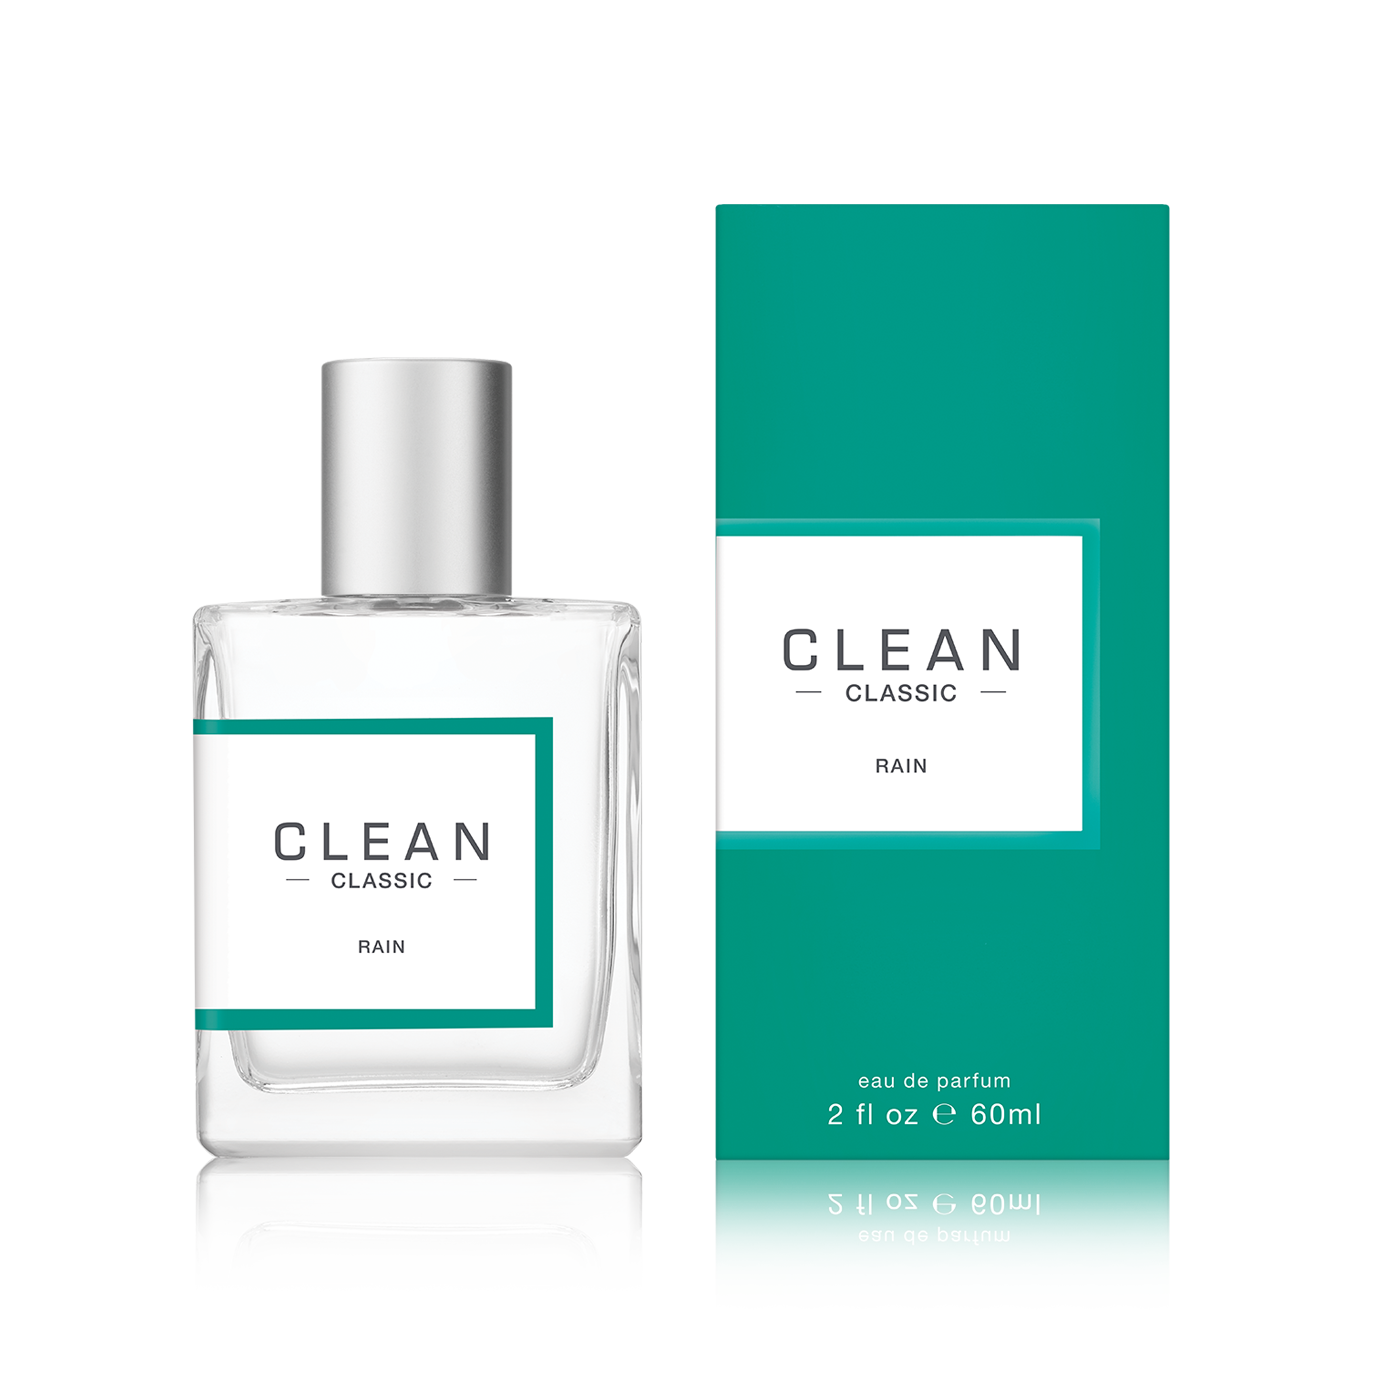 CLEAN CLASSIC Rain Fragrance – Three Sizes – CLEAN Beauty Collective